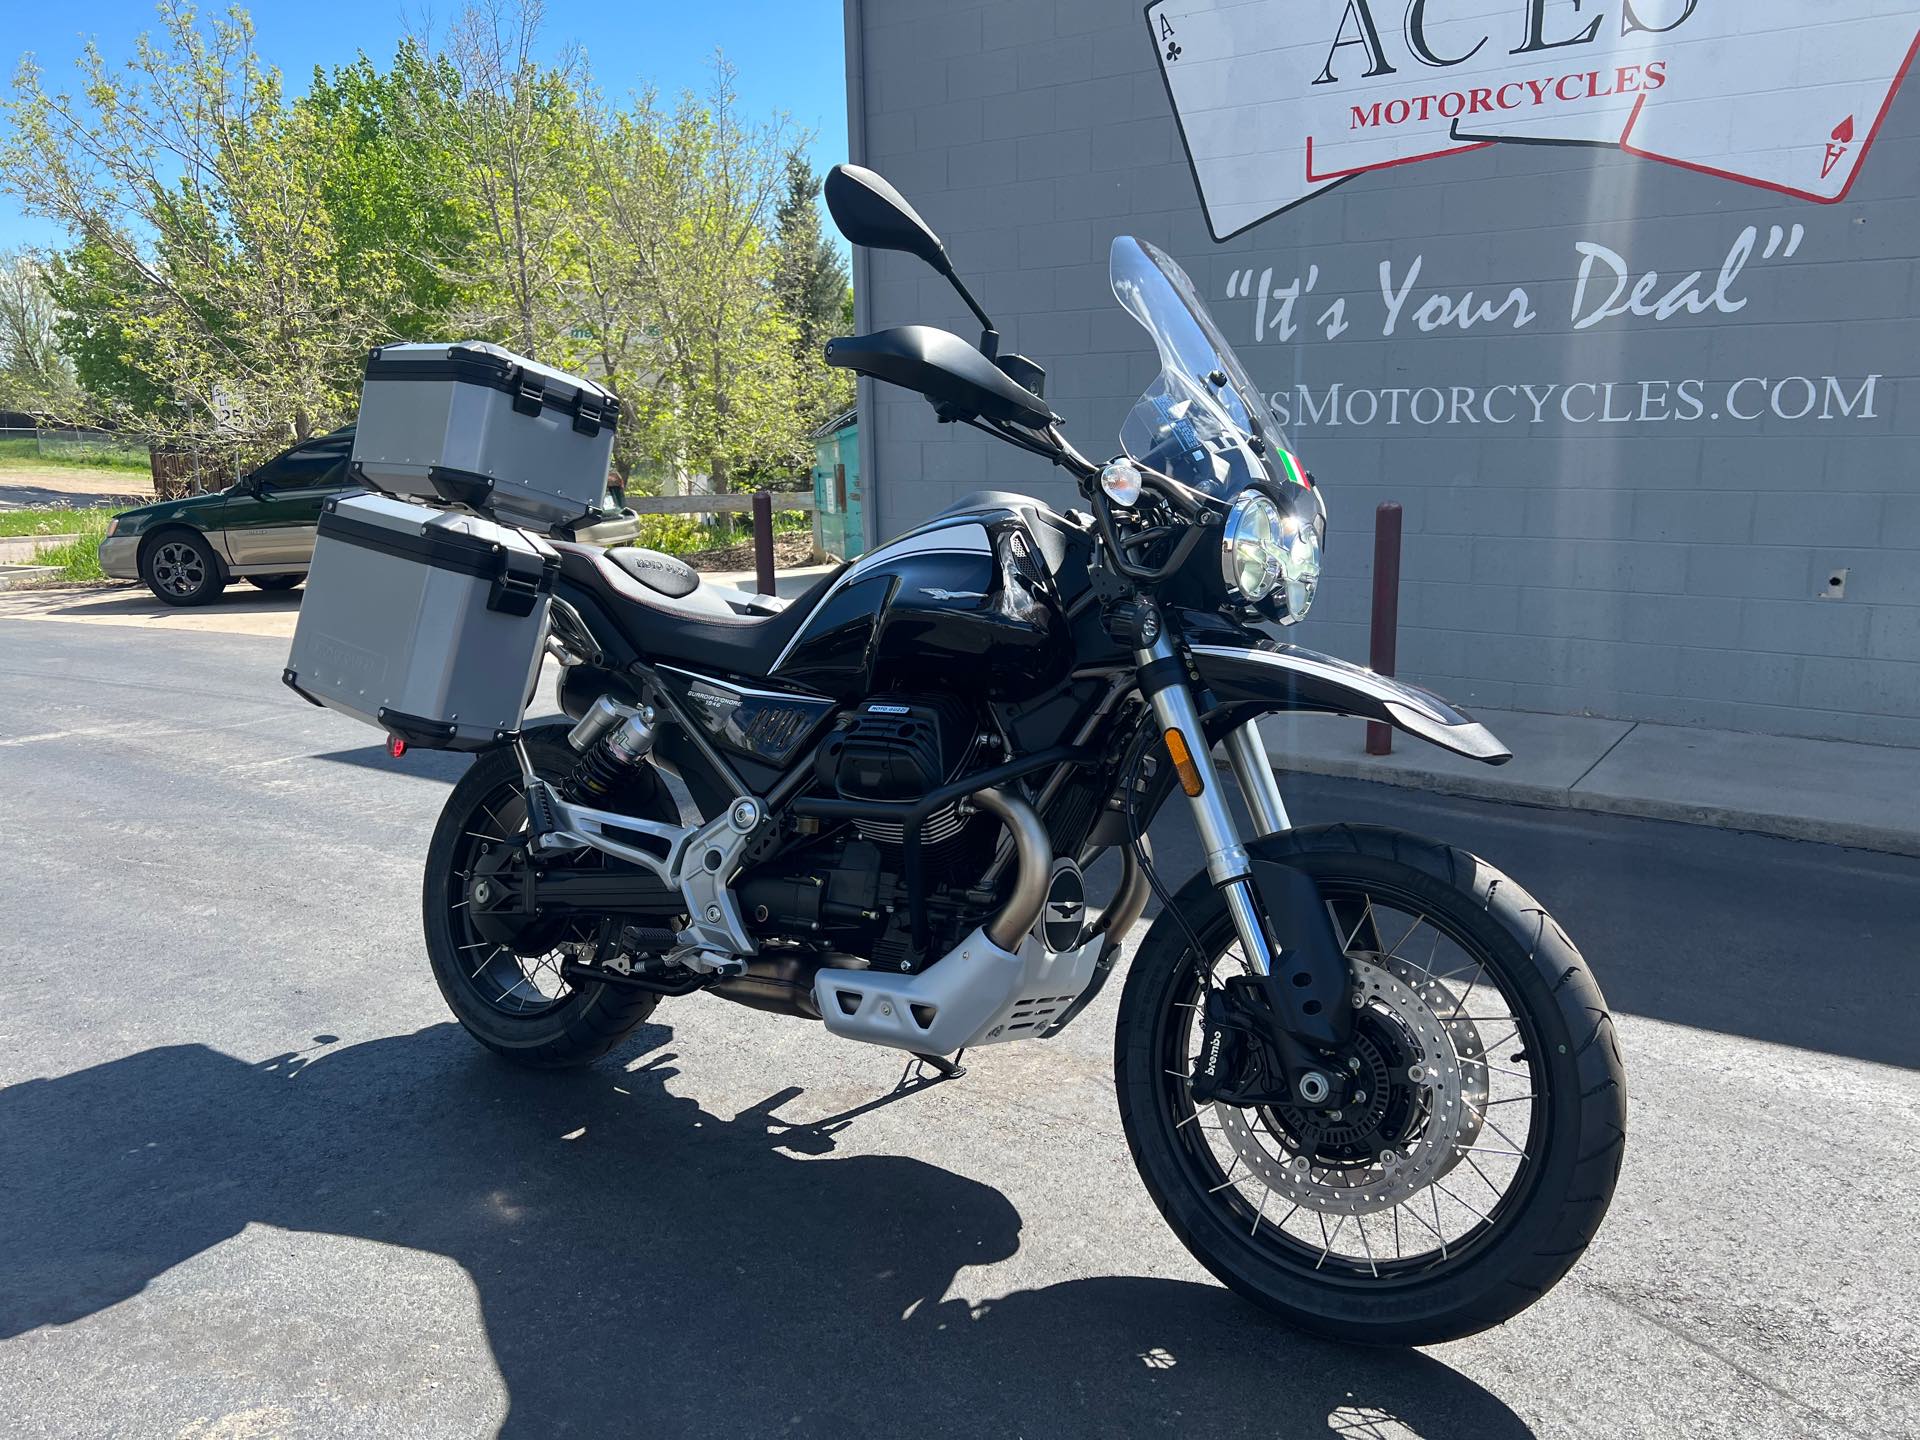 2023 Moto Guzzi V85 TT Guardia dOnore E5 at Aces Motorcycles - Fort Collins